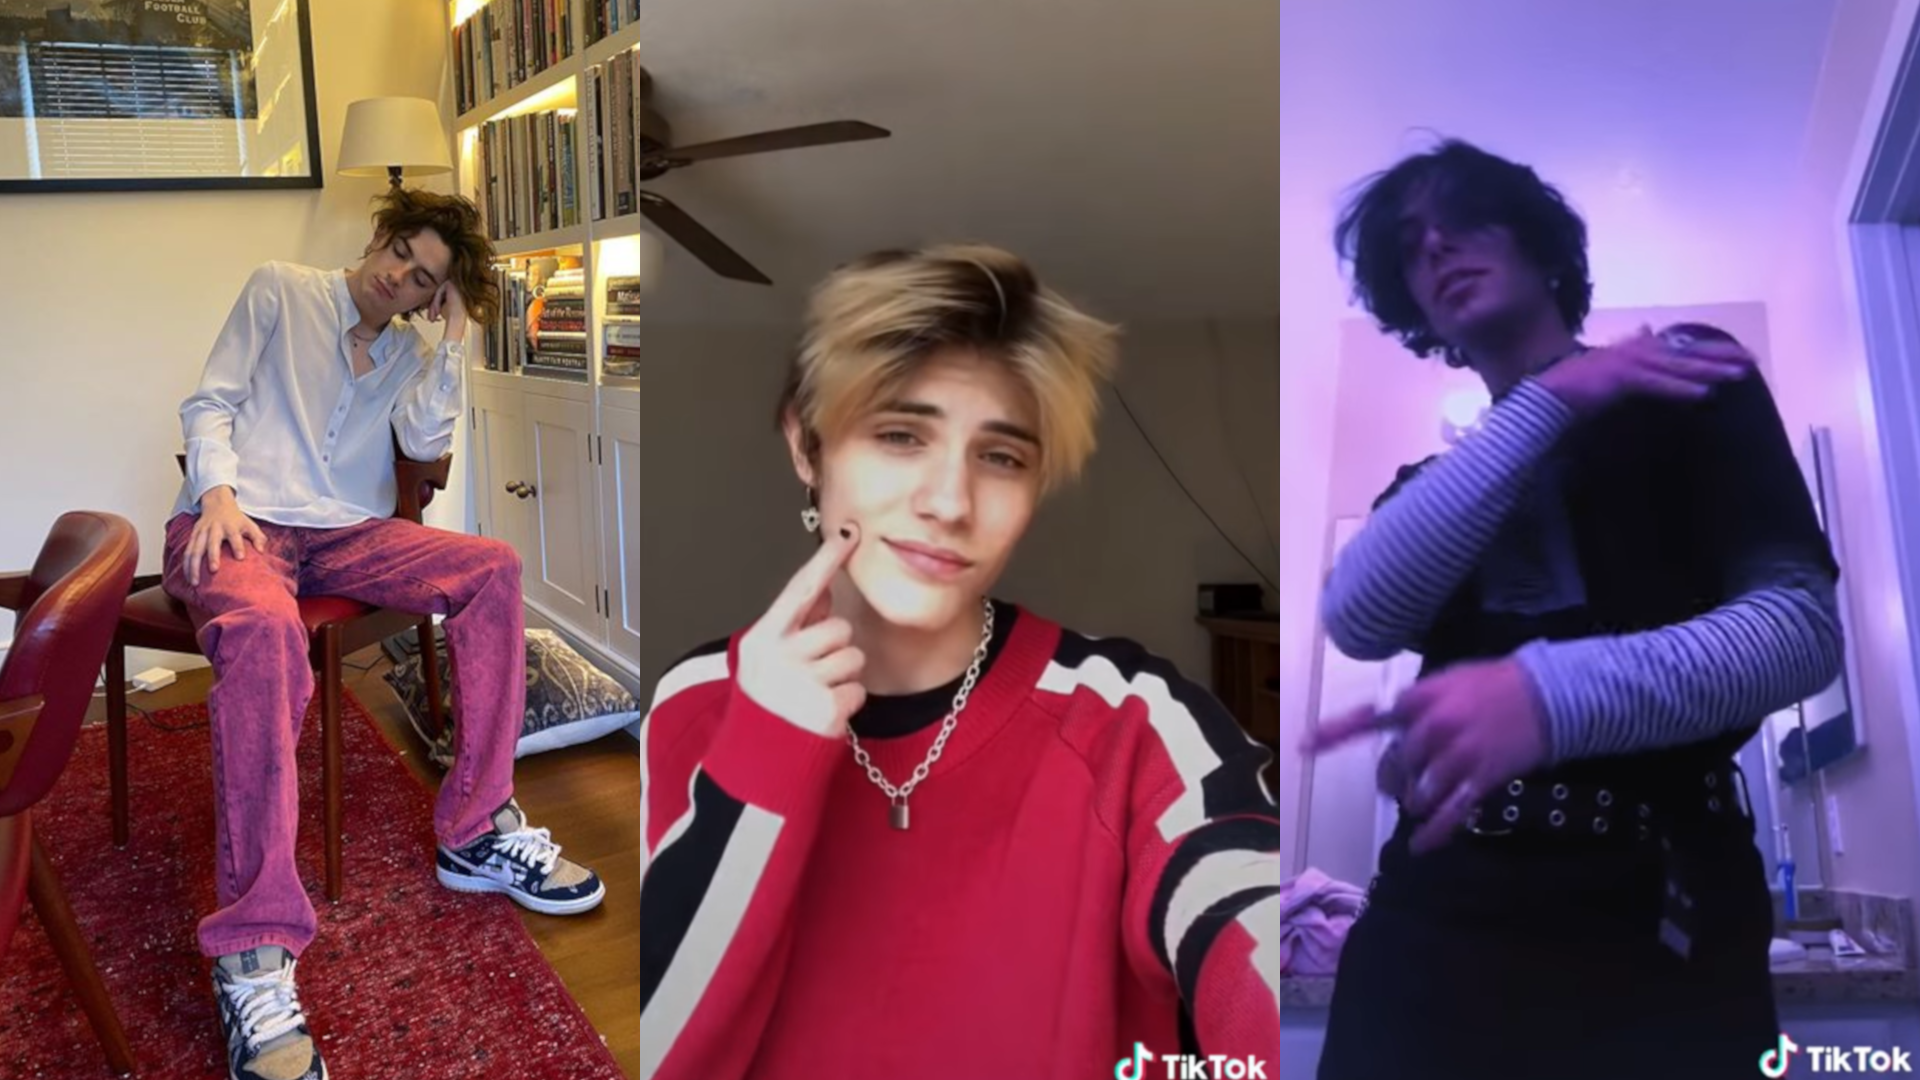 How To Dress Like A Tiktok Star In The Eboy Style